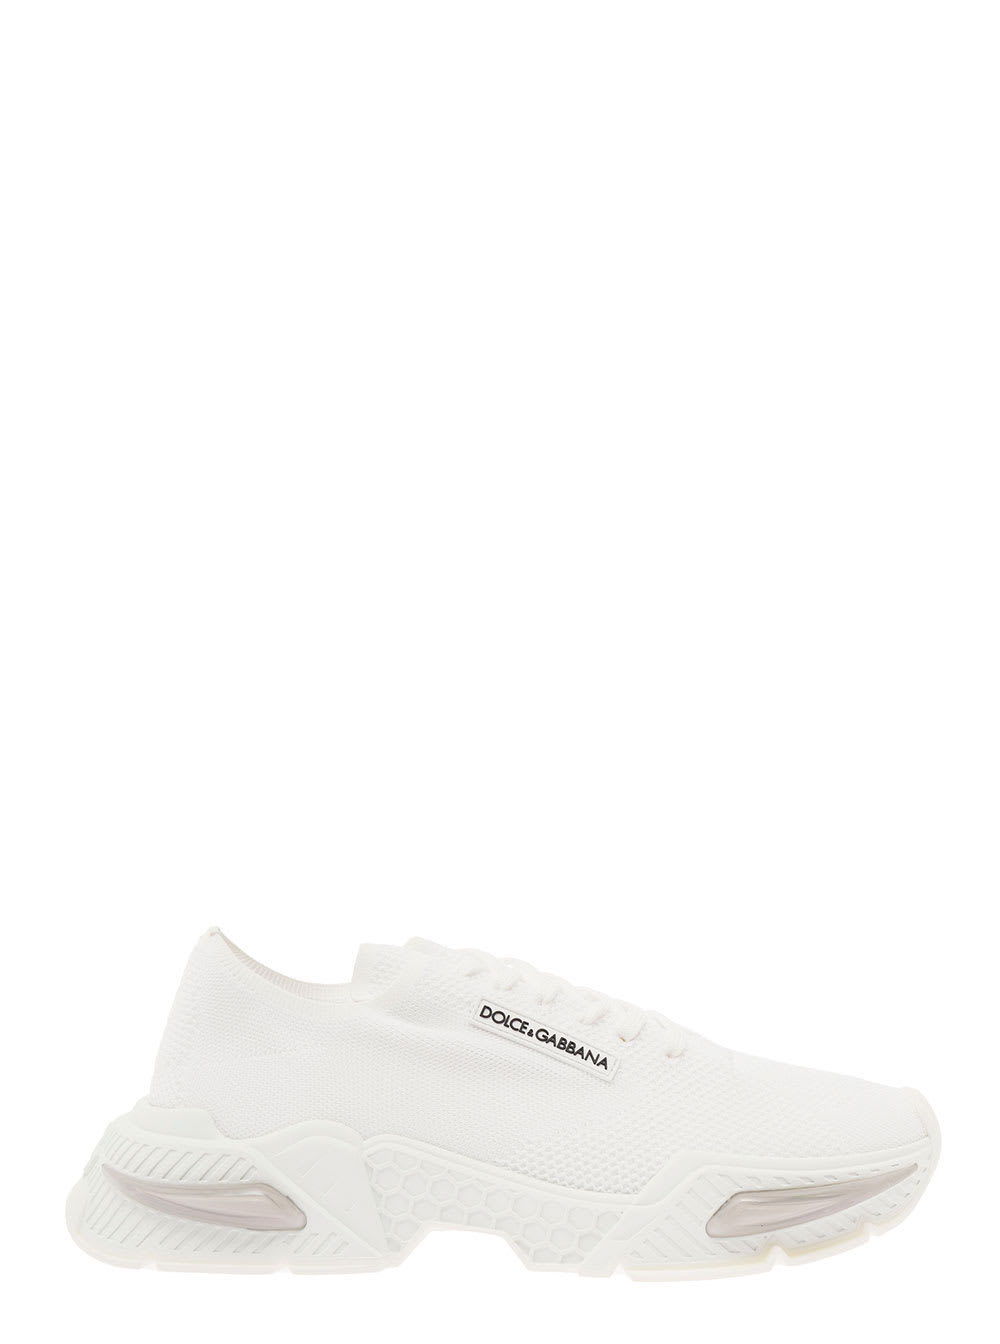 White Daymaster Sneakers In Stretch Knit Dolce & Gabbana Man